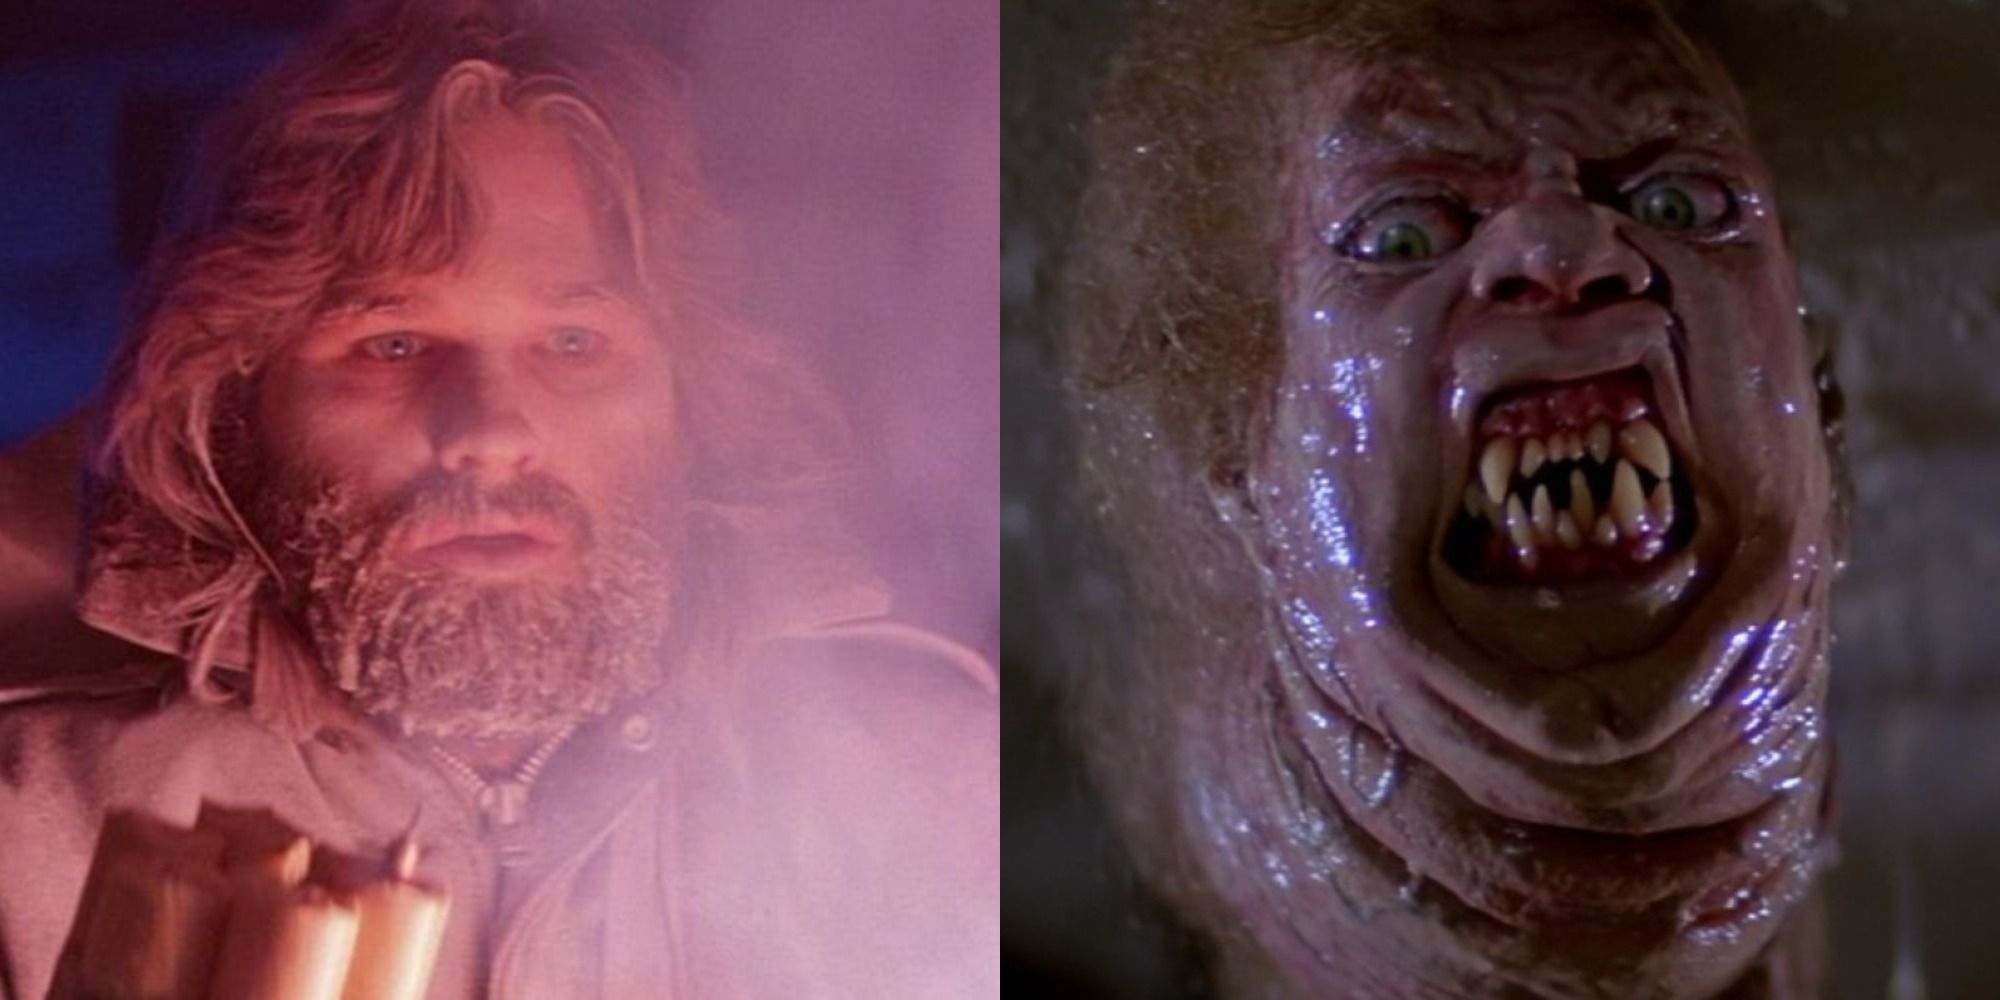 John Carpenter what The Thing is about 